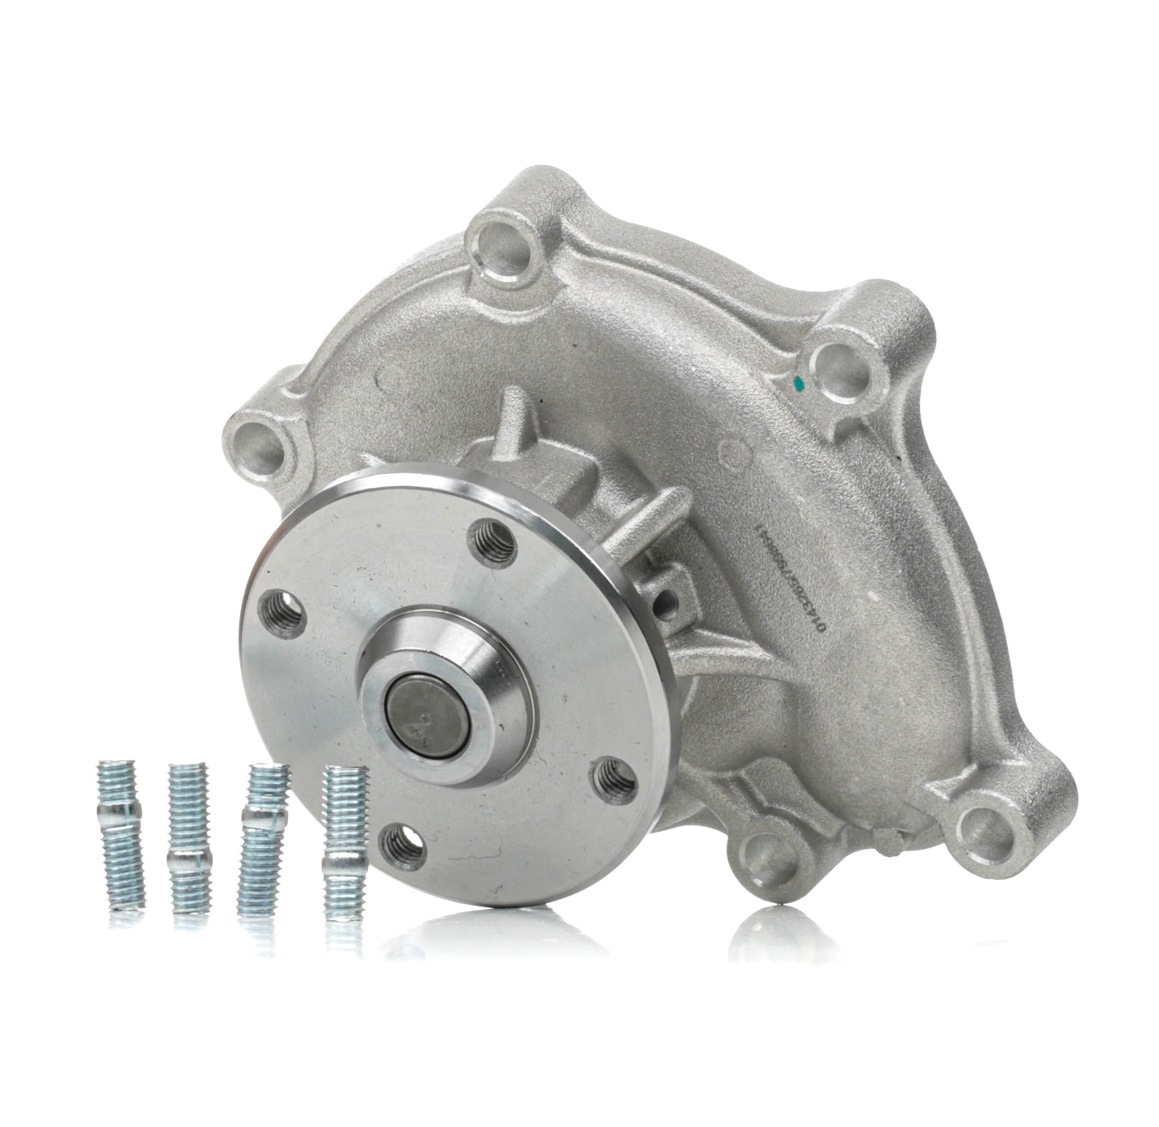 STARK SKWP-0520066 Water pump Cast Aluminium, with seal, with flange, Mechanical, Metal impeller